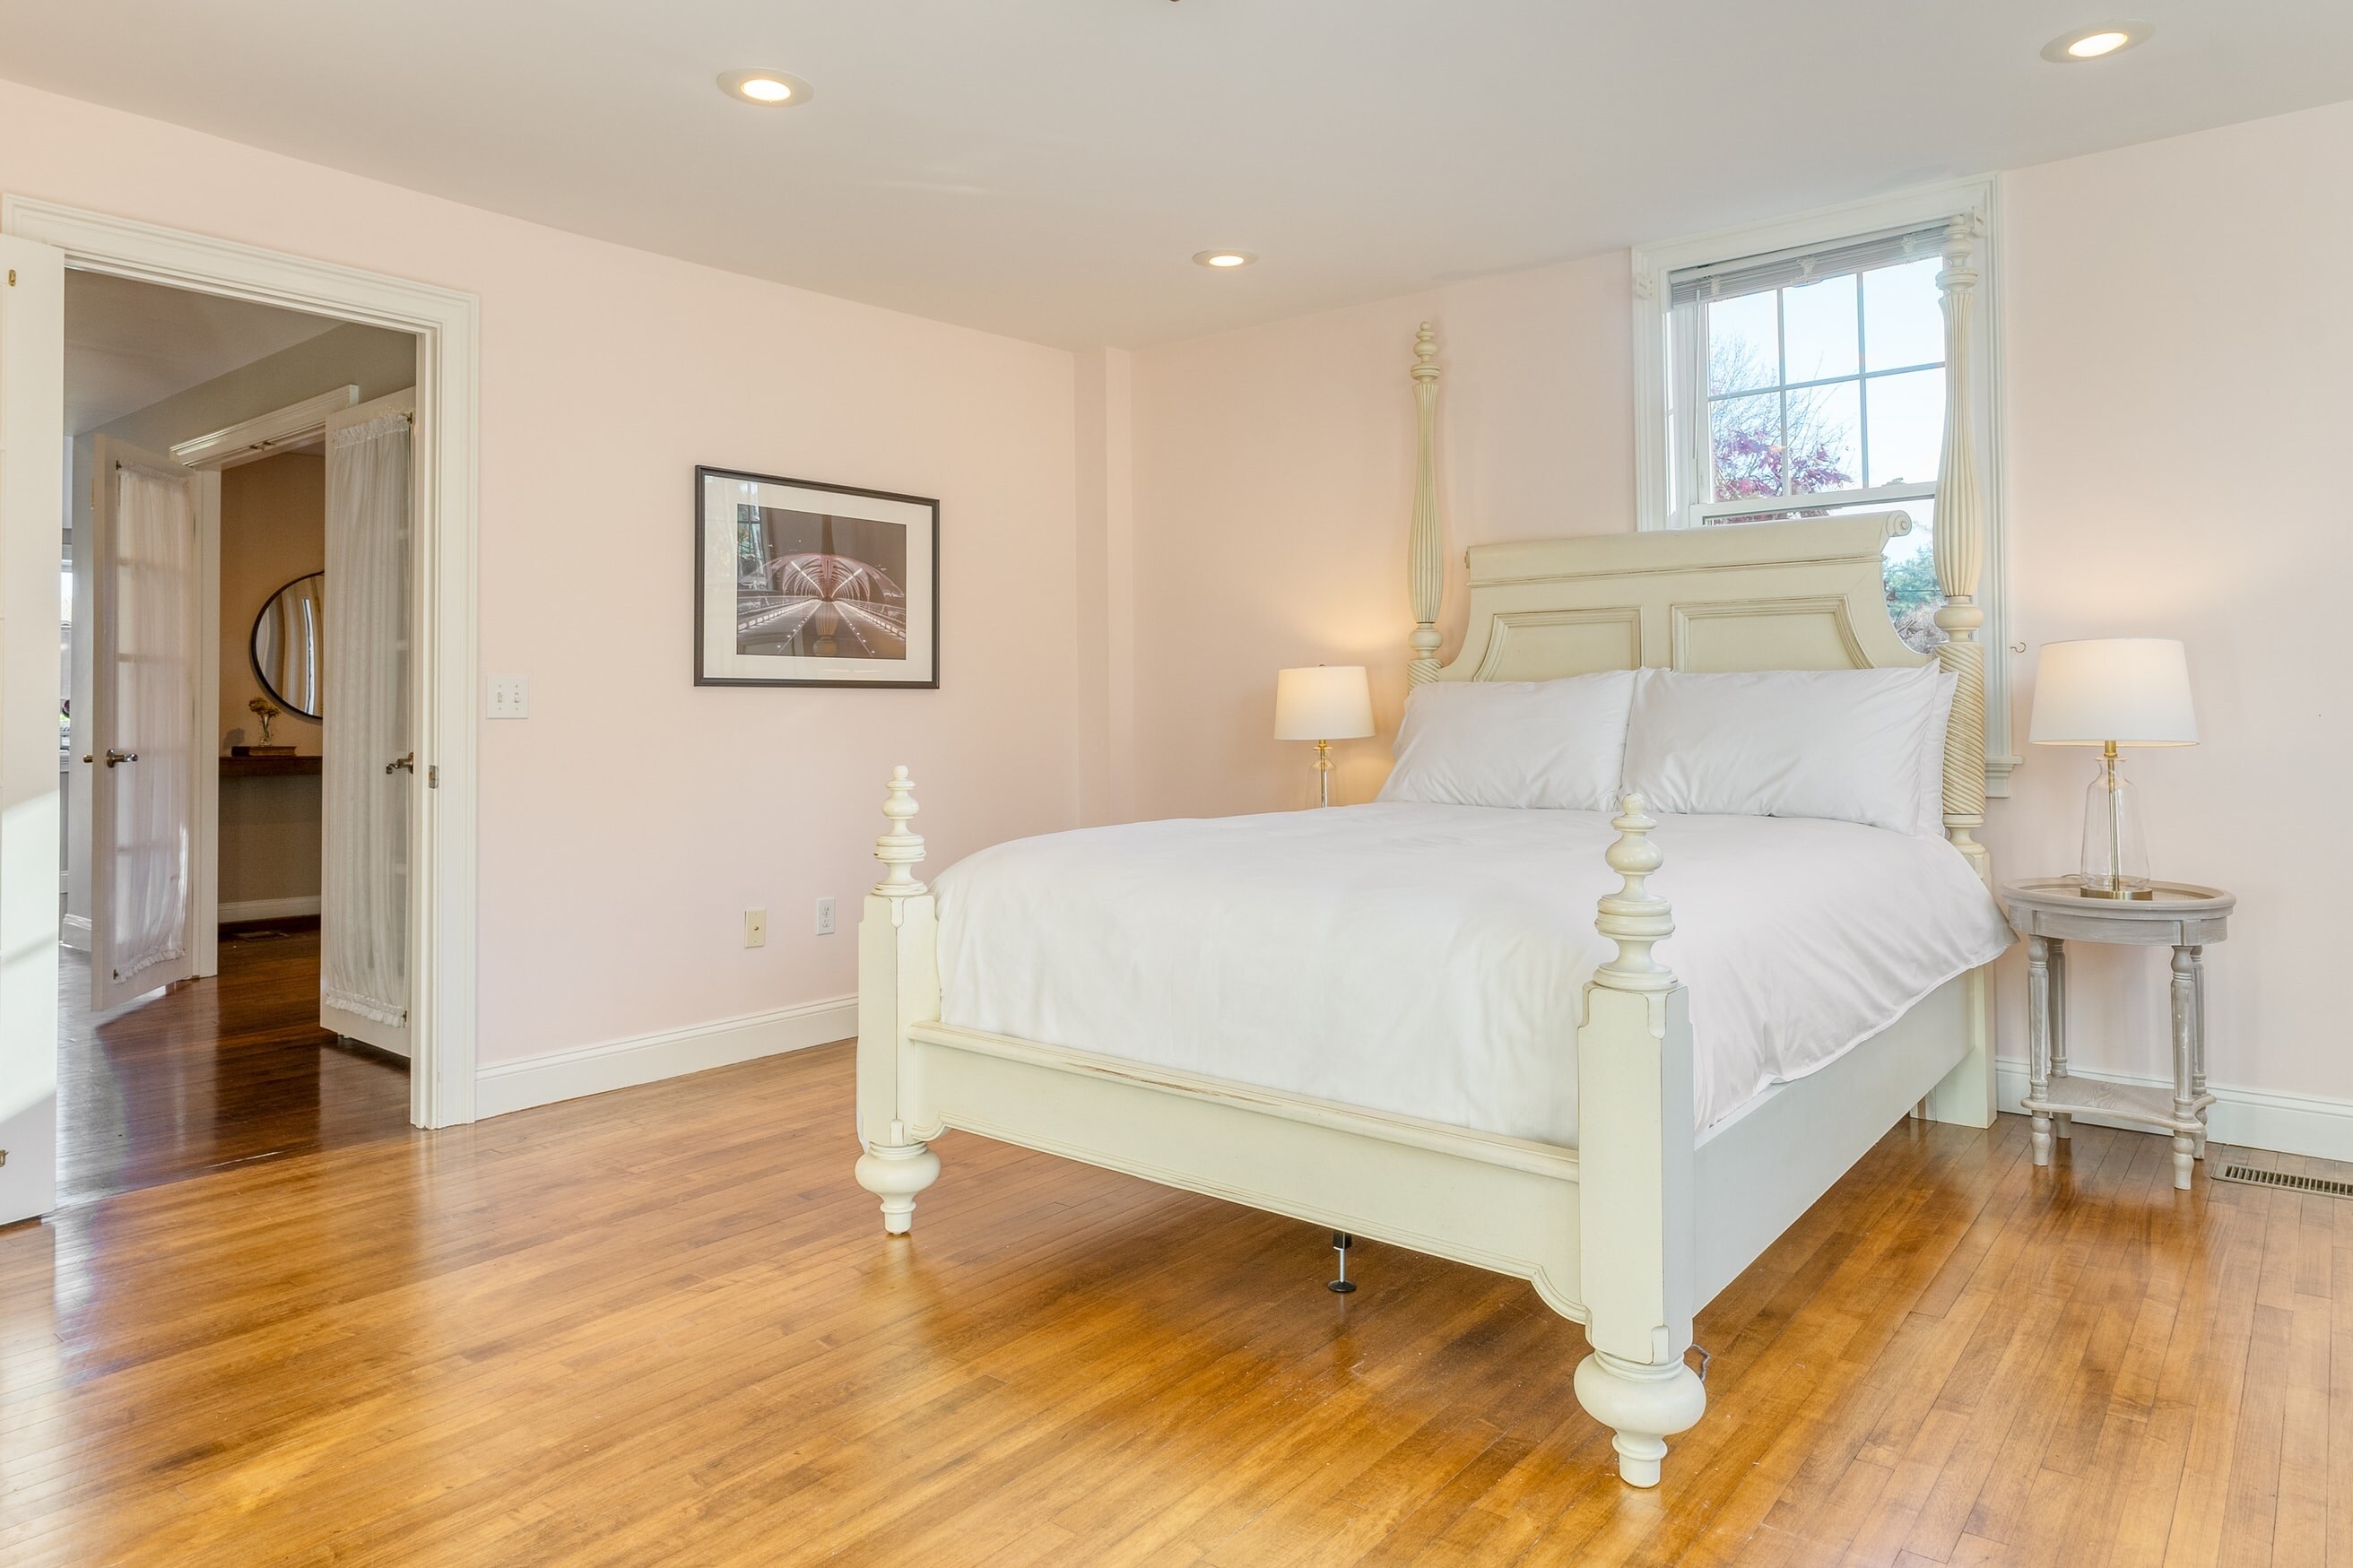 Bedroom 6 is on the first floor of the main house and features a queen bed.